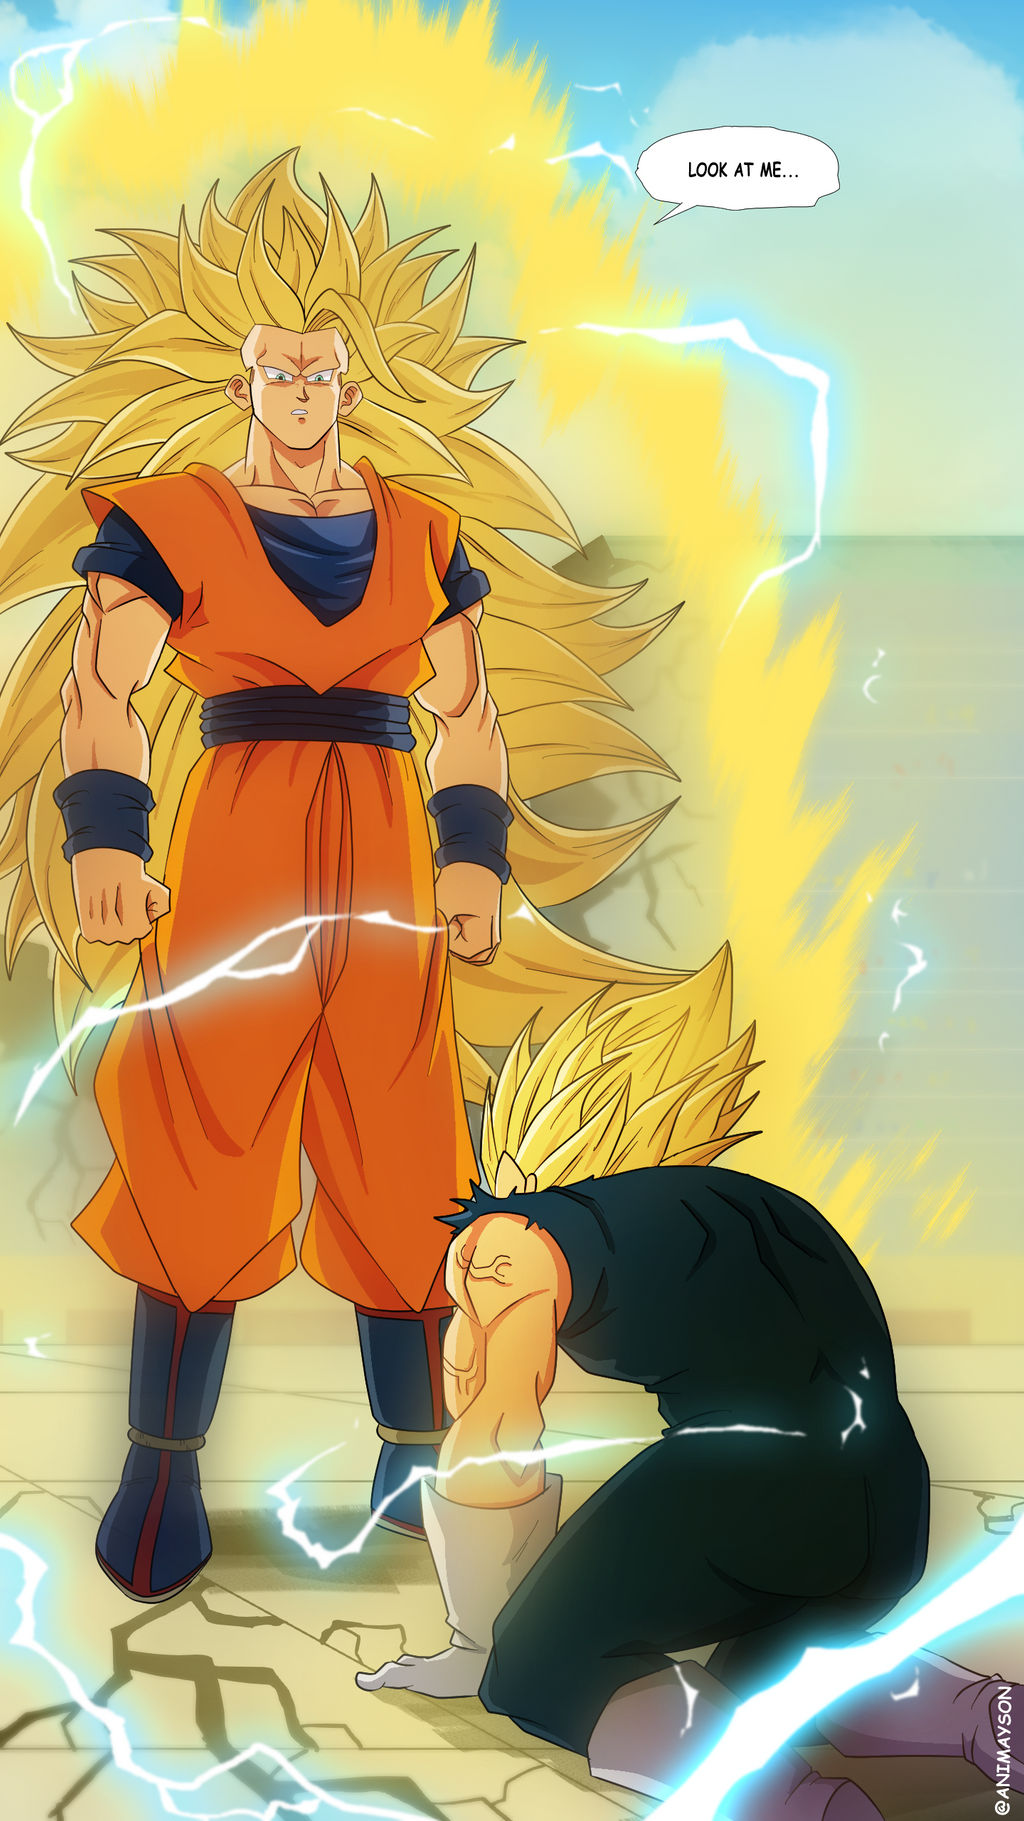 What if Goku did go Super Saiyan 3 on Majin Vegeta? Would that have been a  good or bad move? - Quora